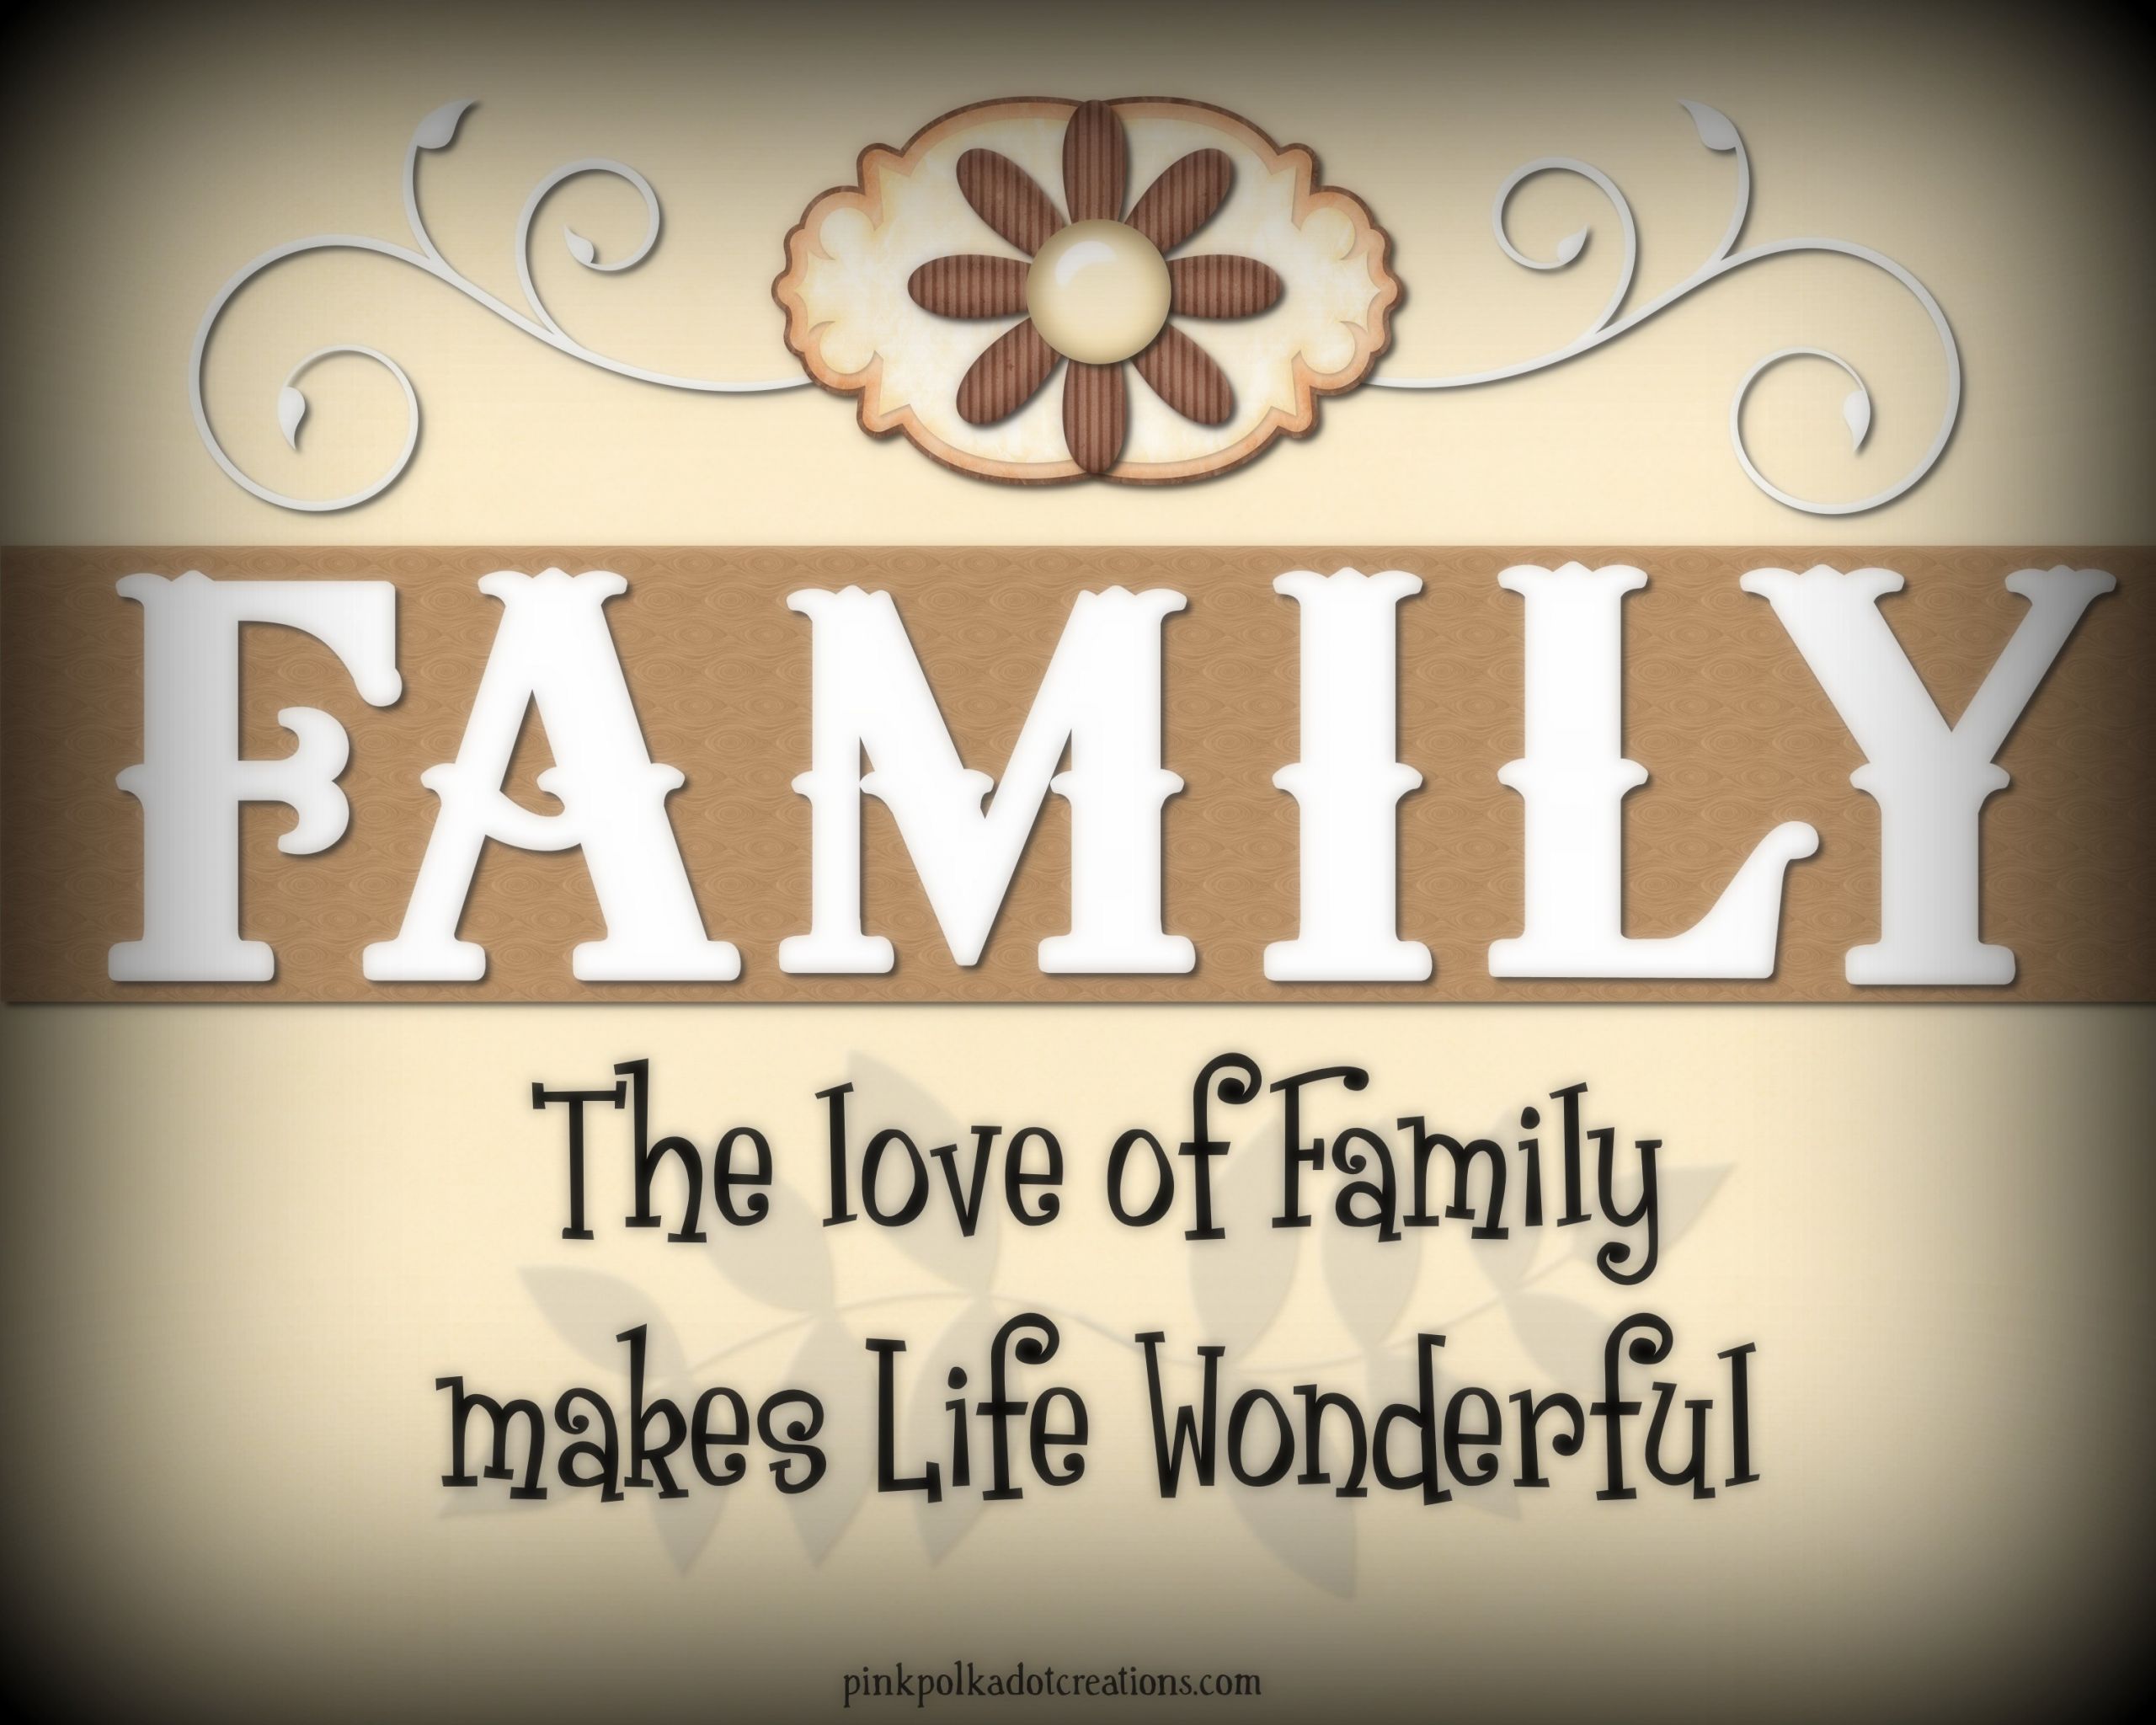 Family Image Quotes
 Printable Family Quotes QuotesGram